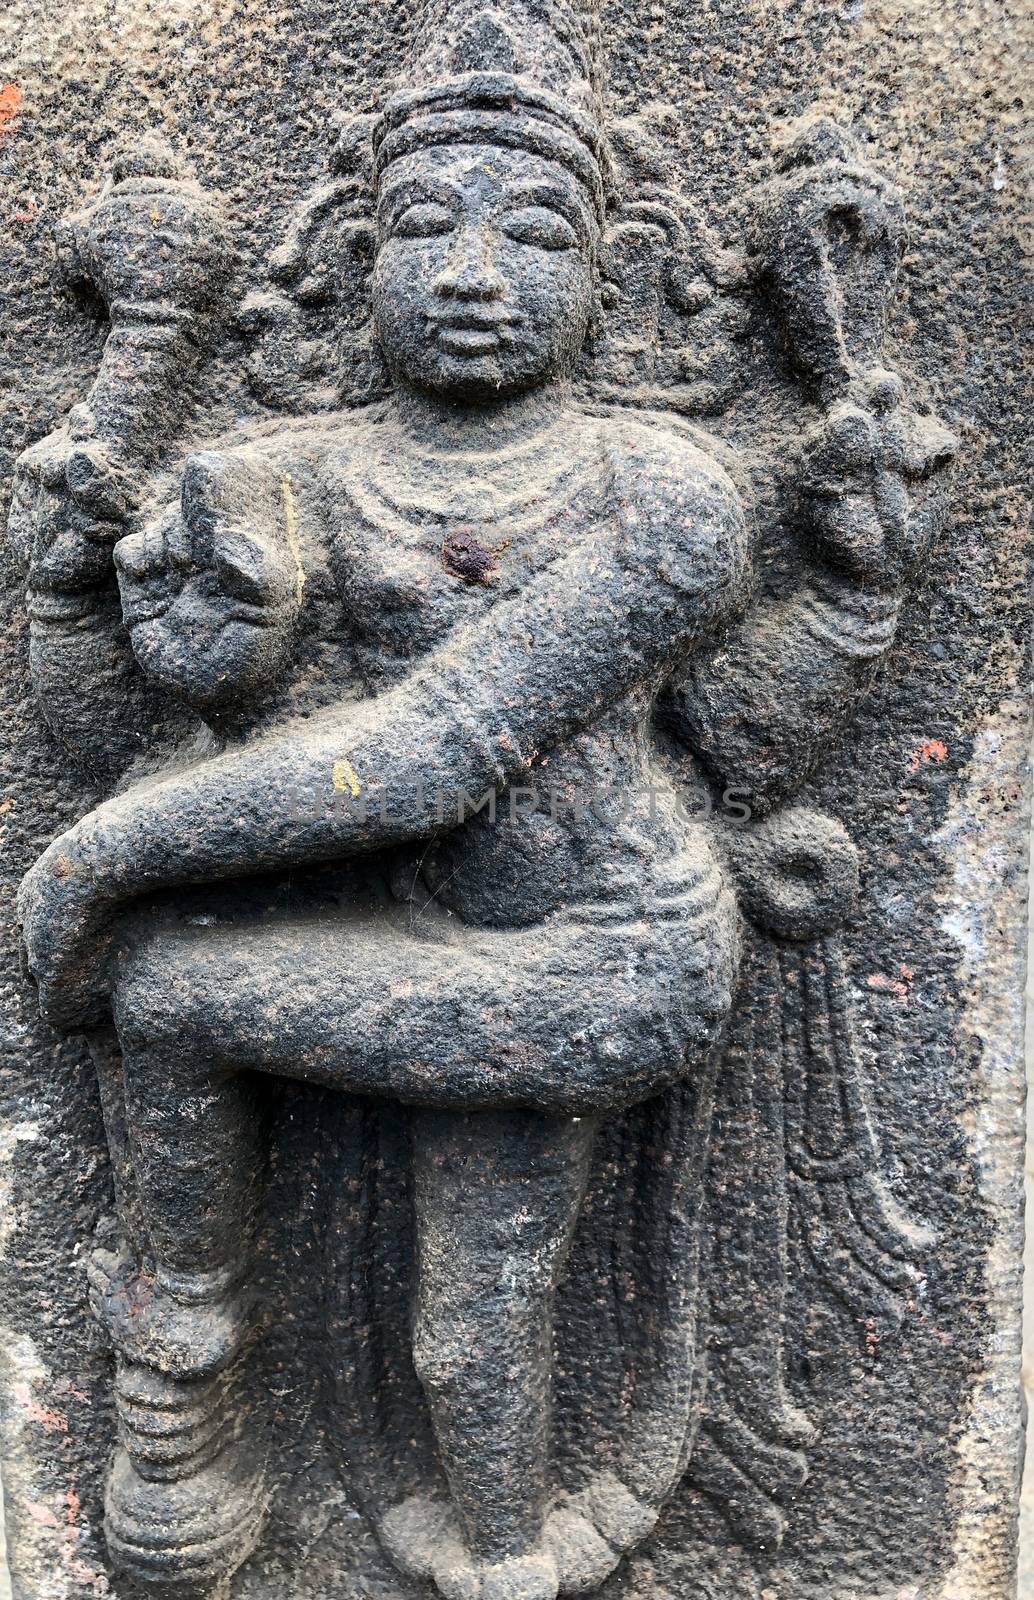 Ancient stone carvings of beautiful sculptures found in the temple in Tamilnadu. Beautiful bas-relief sculptures carved in the granite stone walls.